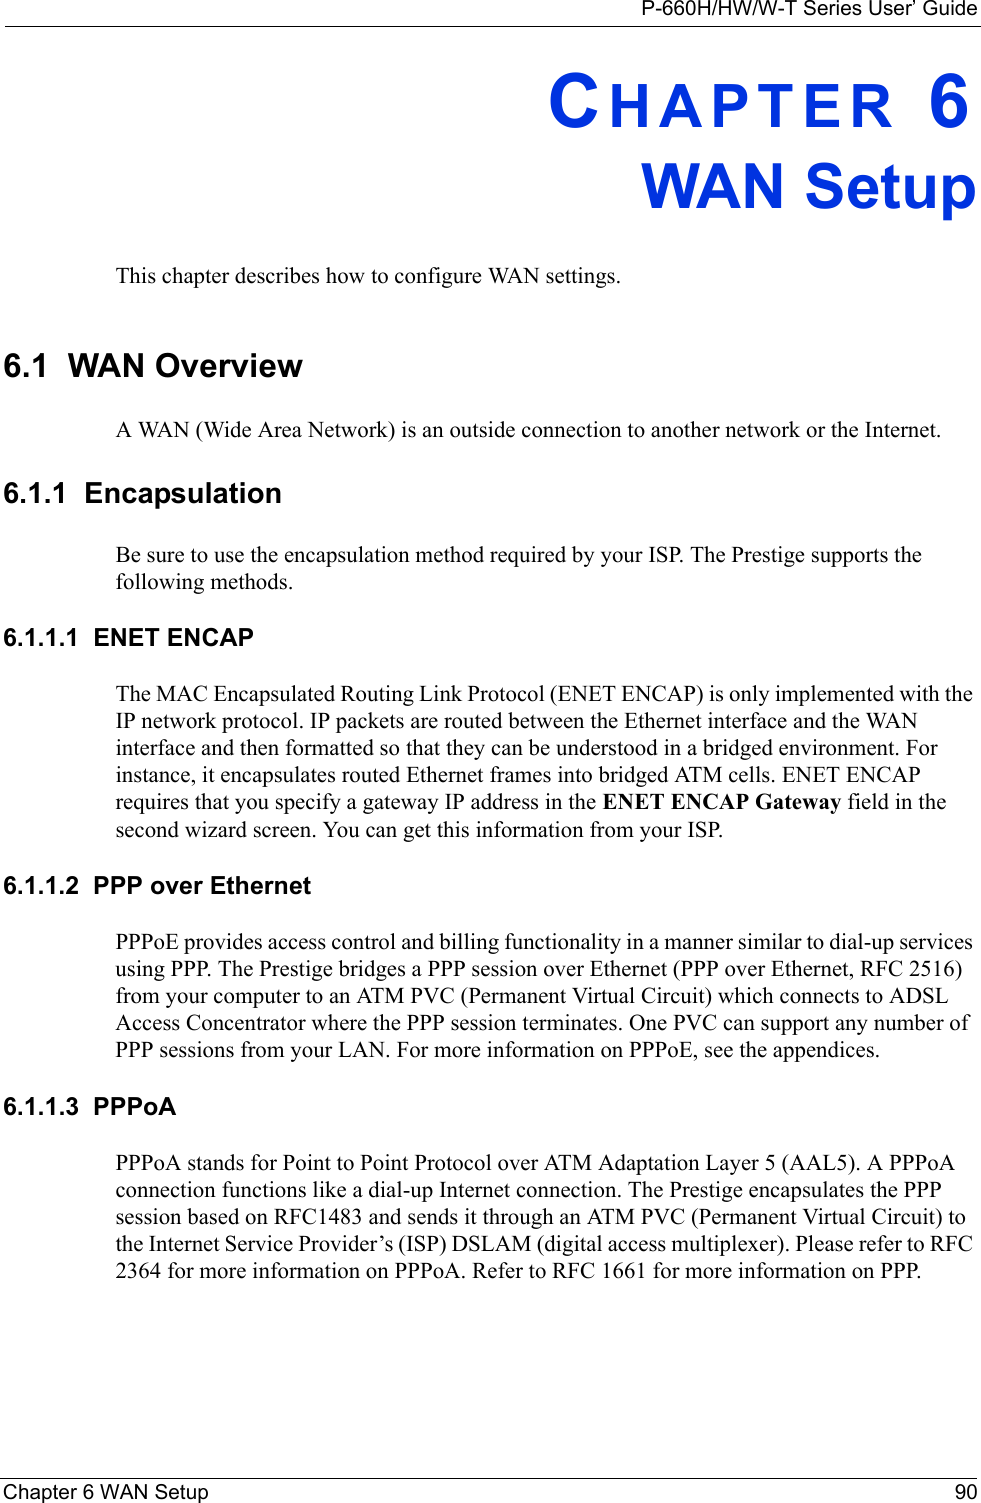 P-660H/HW/W-T Series User’ GuideChapter 6 WAN Setup 90CHAPTER 6WAN SetupThis chapter describes how to configure WAN settings.6.1  WAN Overview A WAN (Wide Area Network) is an outside connection to another network or the Internet.6.1.1  EncapsulationBe sure to use the encapsulation method required by your ISP. The Prestige supports the following methods.6.1.1.1  ENET ENCAPThe MAC Encapsulated Routing Link Protocol (ENET ENCAP) is only implemented with the IP network protocol. IP packets are routed between the Ethernet interface and the WAN interface and then formatted so that they can be understood in a bridged environment. For instance, it encapsulates routed Ethernet frames into bridged ATM cells. ENET ENCAP requires that you specify a gateway IP address in the ENET ENCAP Gateway field in the second wizard screen. You can get this information from your ISP.6.1.1.2  PPP over EthernetPPPoE provides access control and billing functionality in a manner similar to dial-up services using PPP. The Prestige bridges a PPP session over Ethernet (PPP over Ethernet, RFC 2516) from your computer to an ATM PVC (Permanent Virtual Circuit) which connects to ADSL Access Concentrator where the PPP session terminates. One PVC can support any number of PPP sessions from your LAN. For more information on PPPoE, see the appendices.6.1.1.3  PPPoAPPPoA stands for Point to Point Protocol over ATM Adaptation Layer 5 (AAL5). A PPPoA connection functions like a dial-up Internet connection. The Prestige encapsulates the PPP session based on RFC1483 and sends it through an ATM PVC (Permanent Virtual Circuit) to the Internet Service Provider’s (ISP) DSLAM (digital access multiplexer). Please refer to RFC 2364 for more information on PPPoA. Refer to RFC 1661 for more information on PPP.